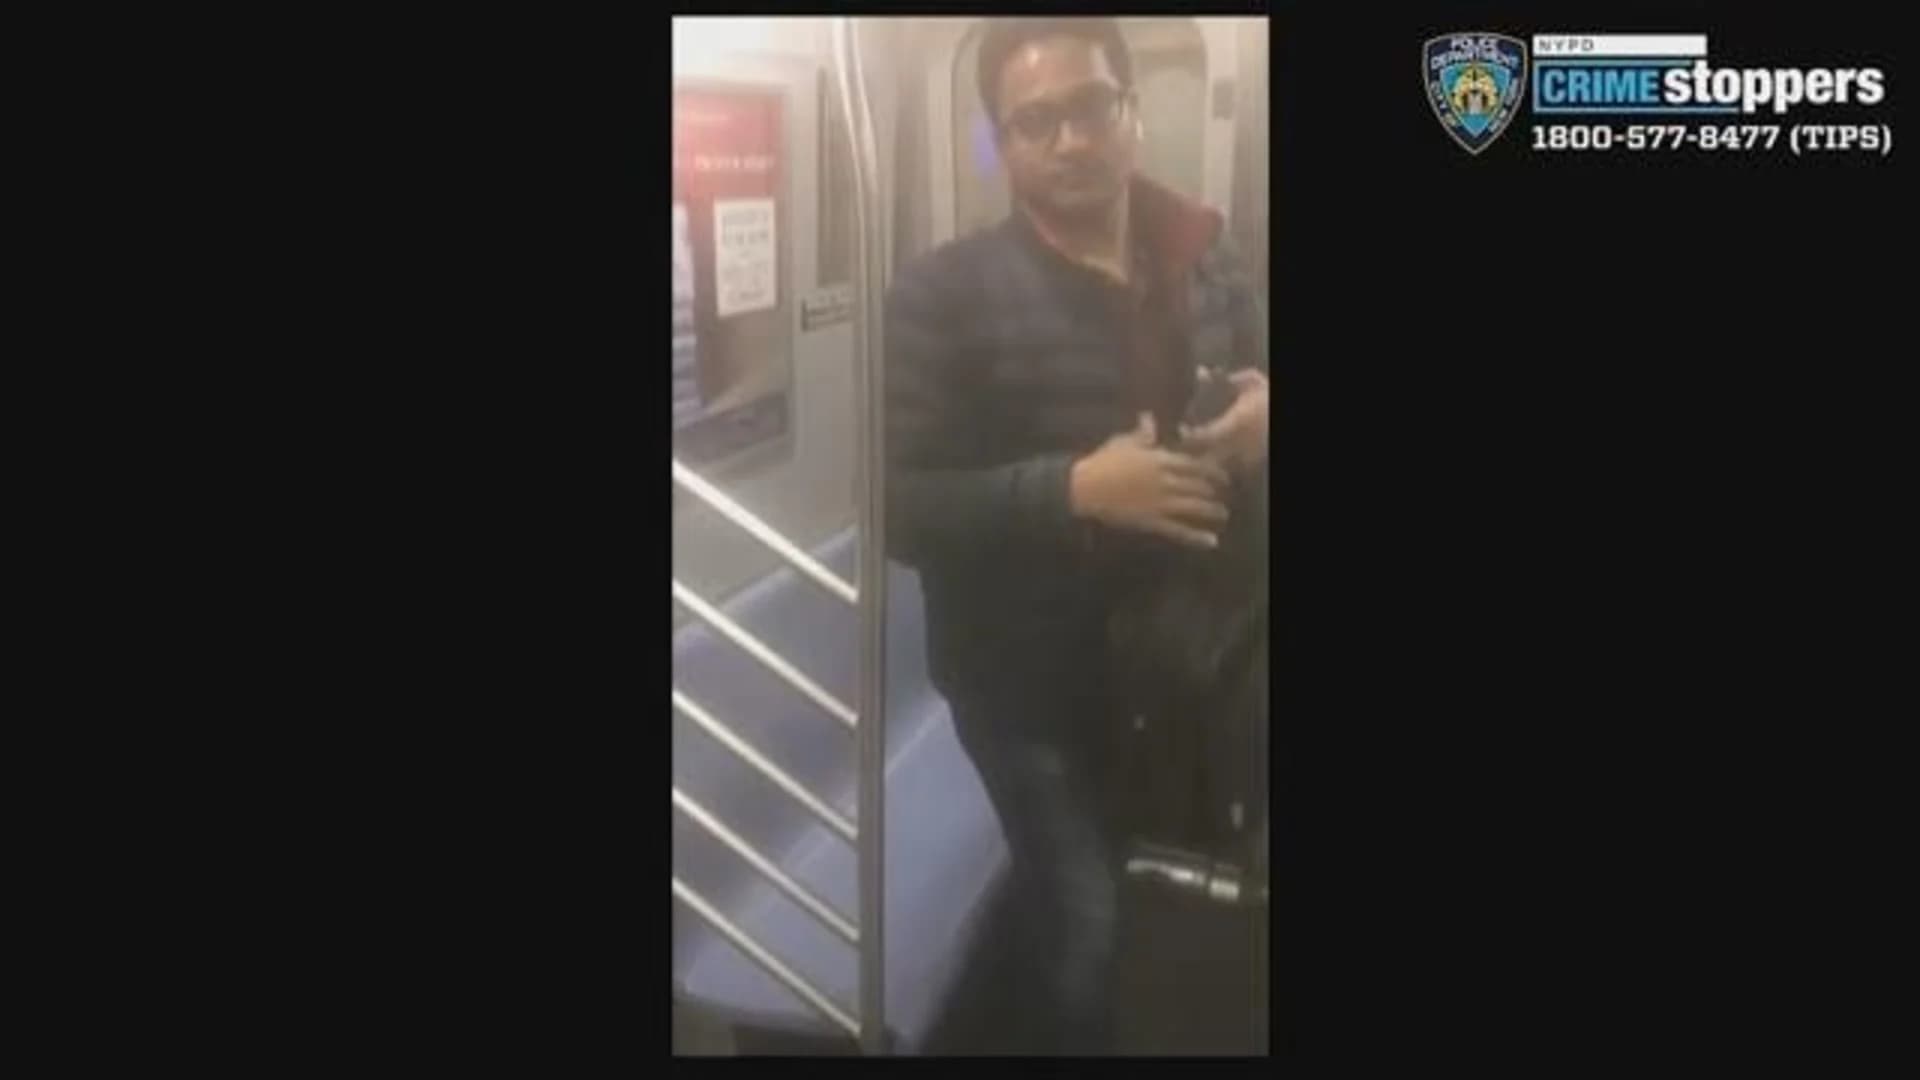 Police: Man groped woman on subway in Williamsburg